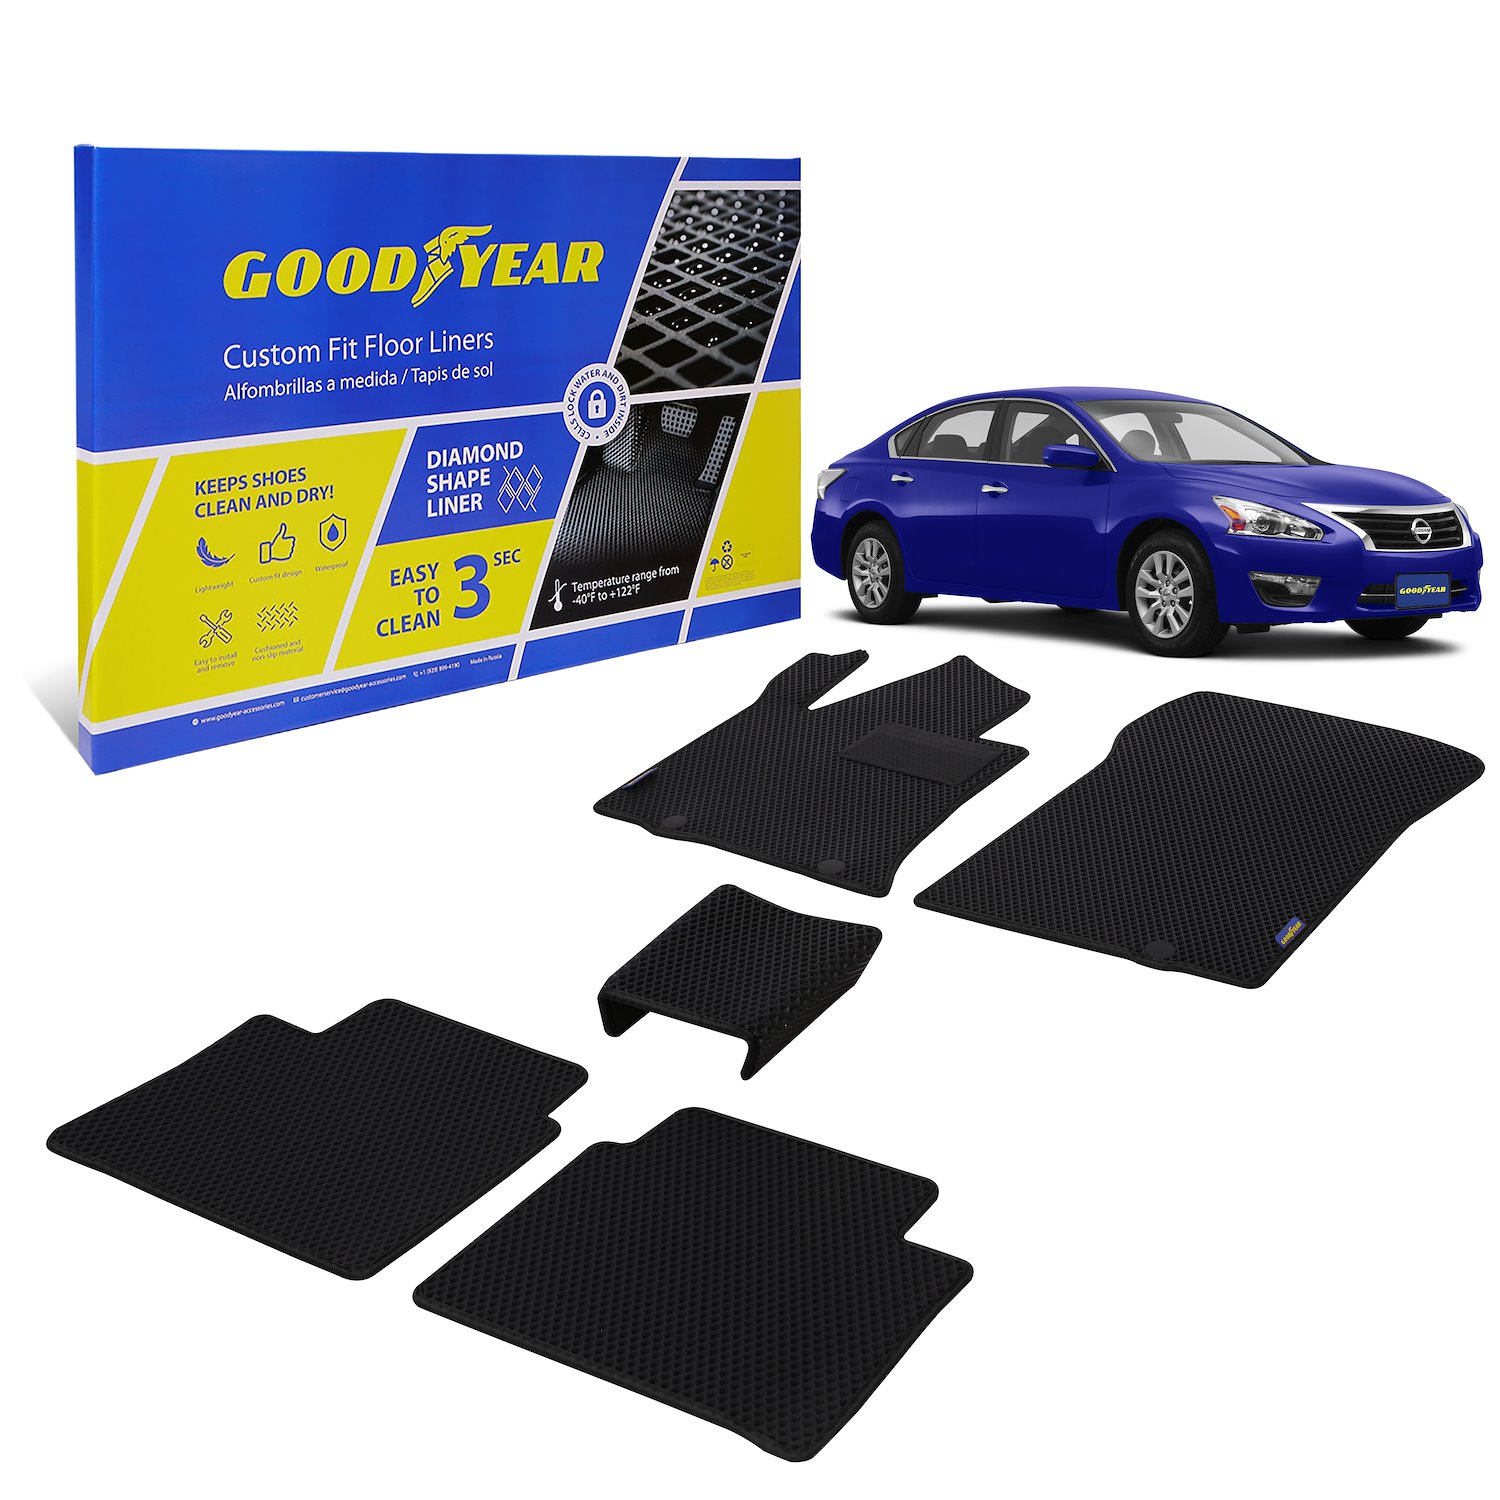 Goodyear Custom-Fit Floor Liners for 2013-2015 Nissan Altima